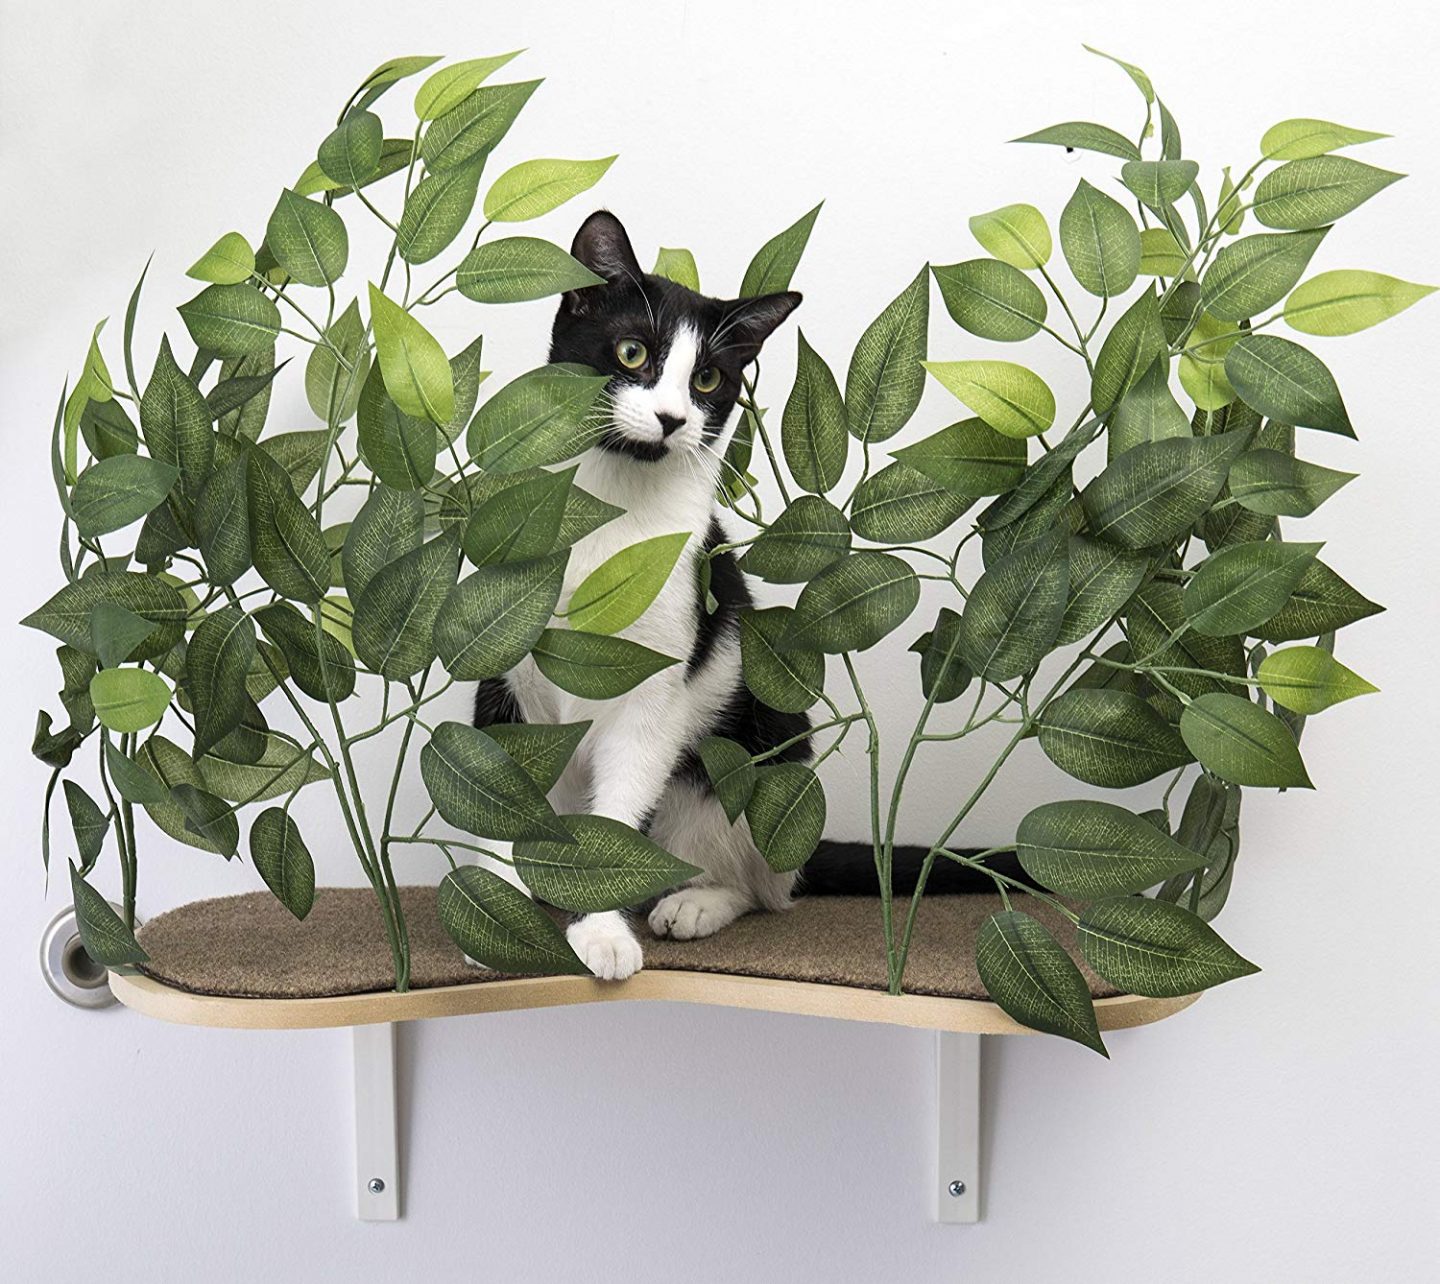 Cat Perch With Pretty Silk Leaves - This wall mounted cat perch really captured our heart. It really stands out among the other cat shelves featured in this post. Lots of PICTURES!